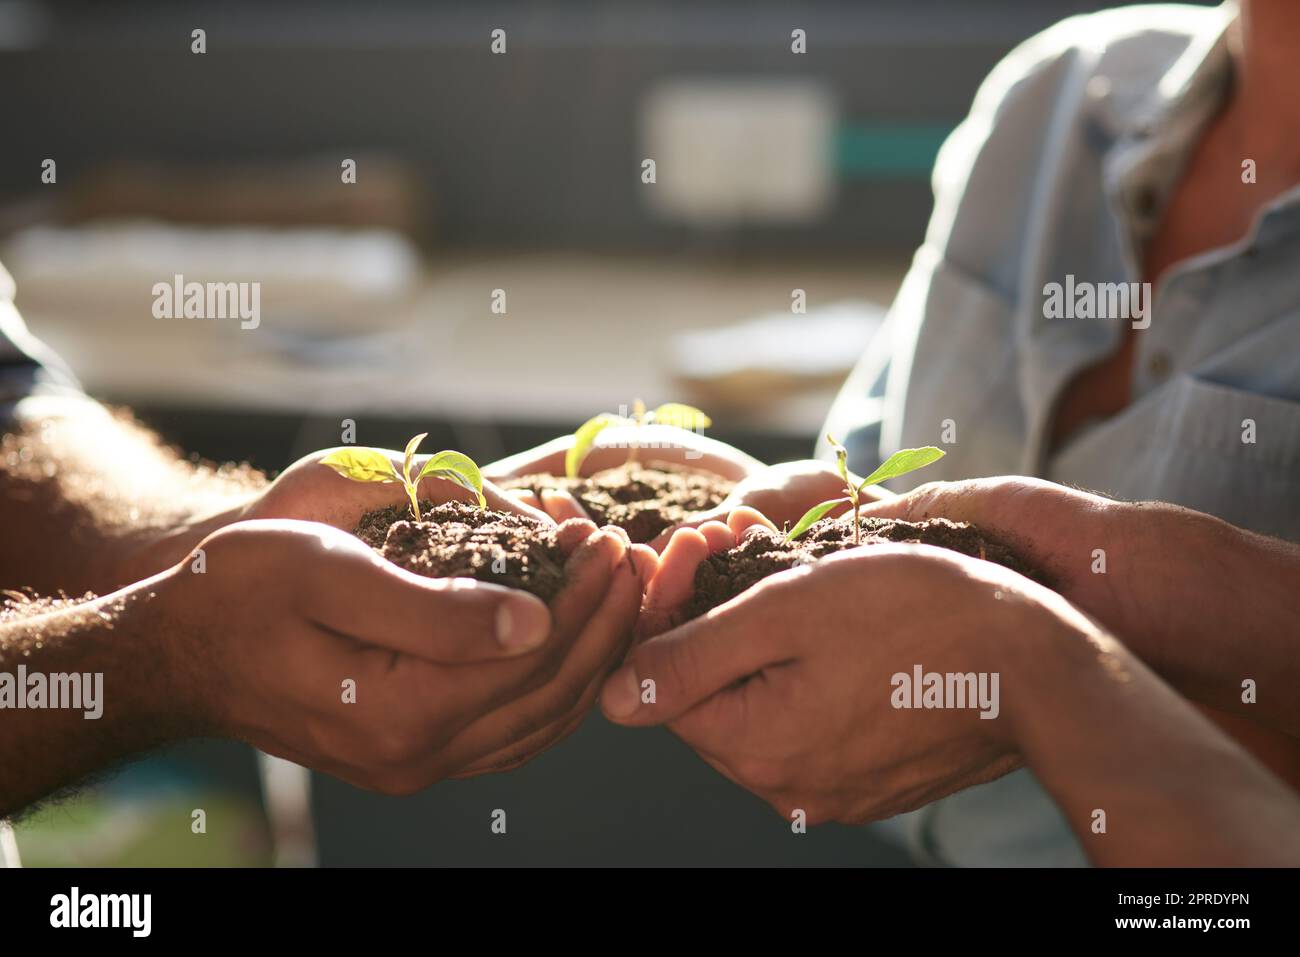 Work together, grow together. Closeup shot of an unrecognizable group of businesspeople holding plants growing out of soil. Stock Photo